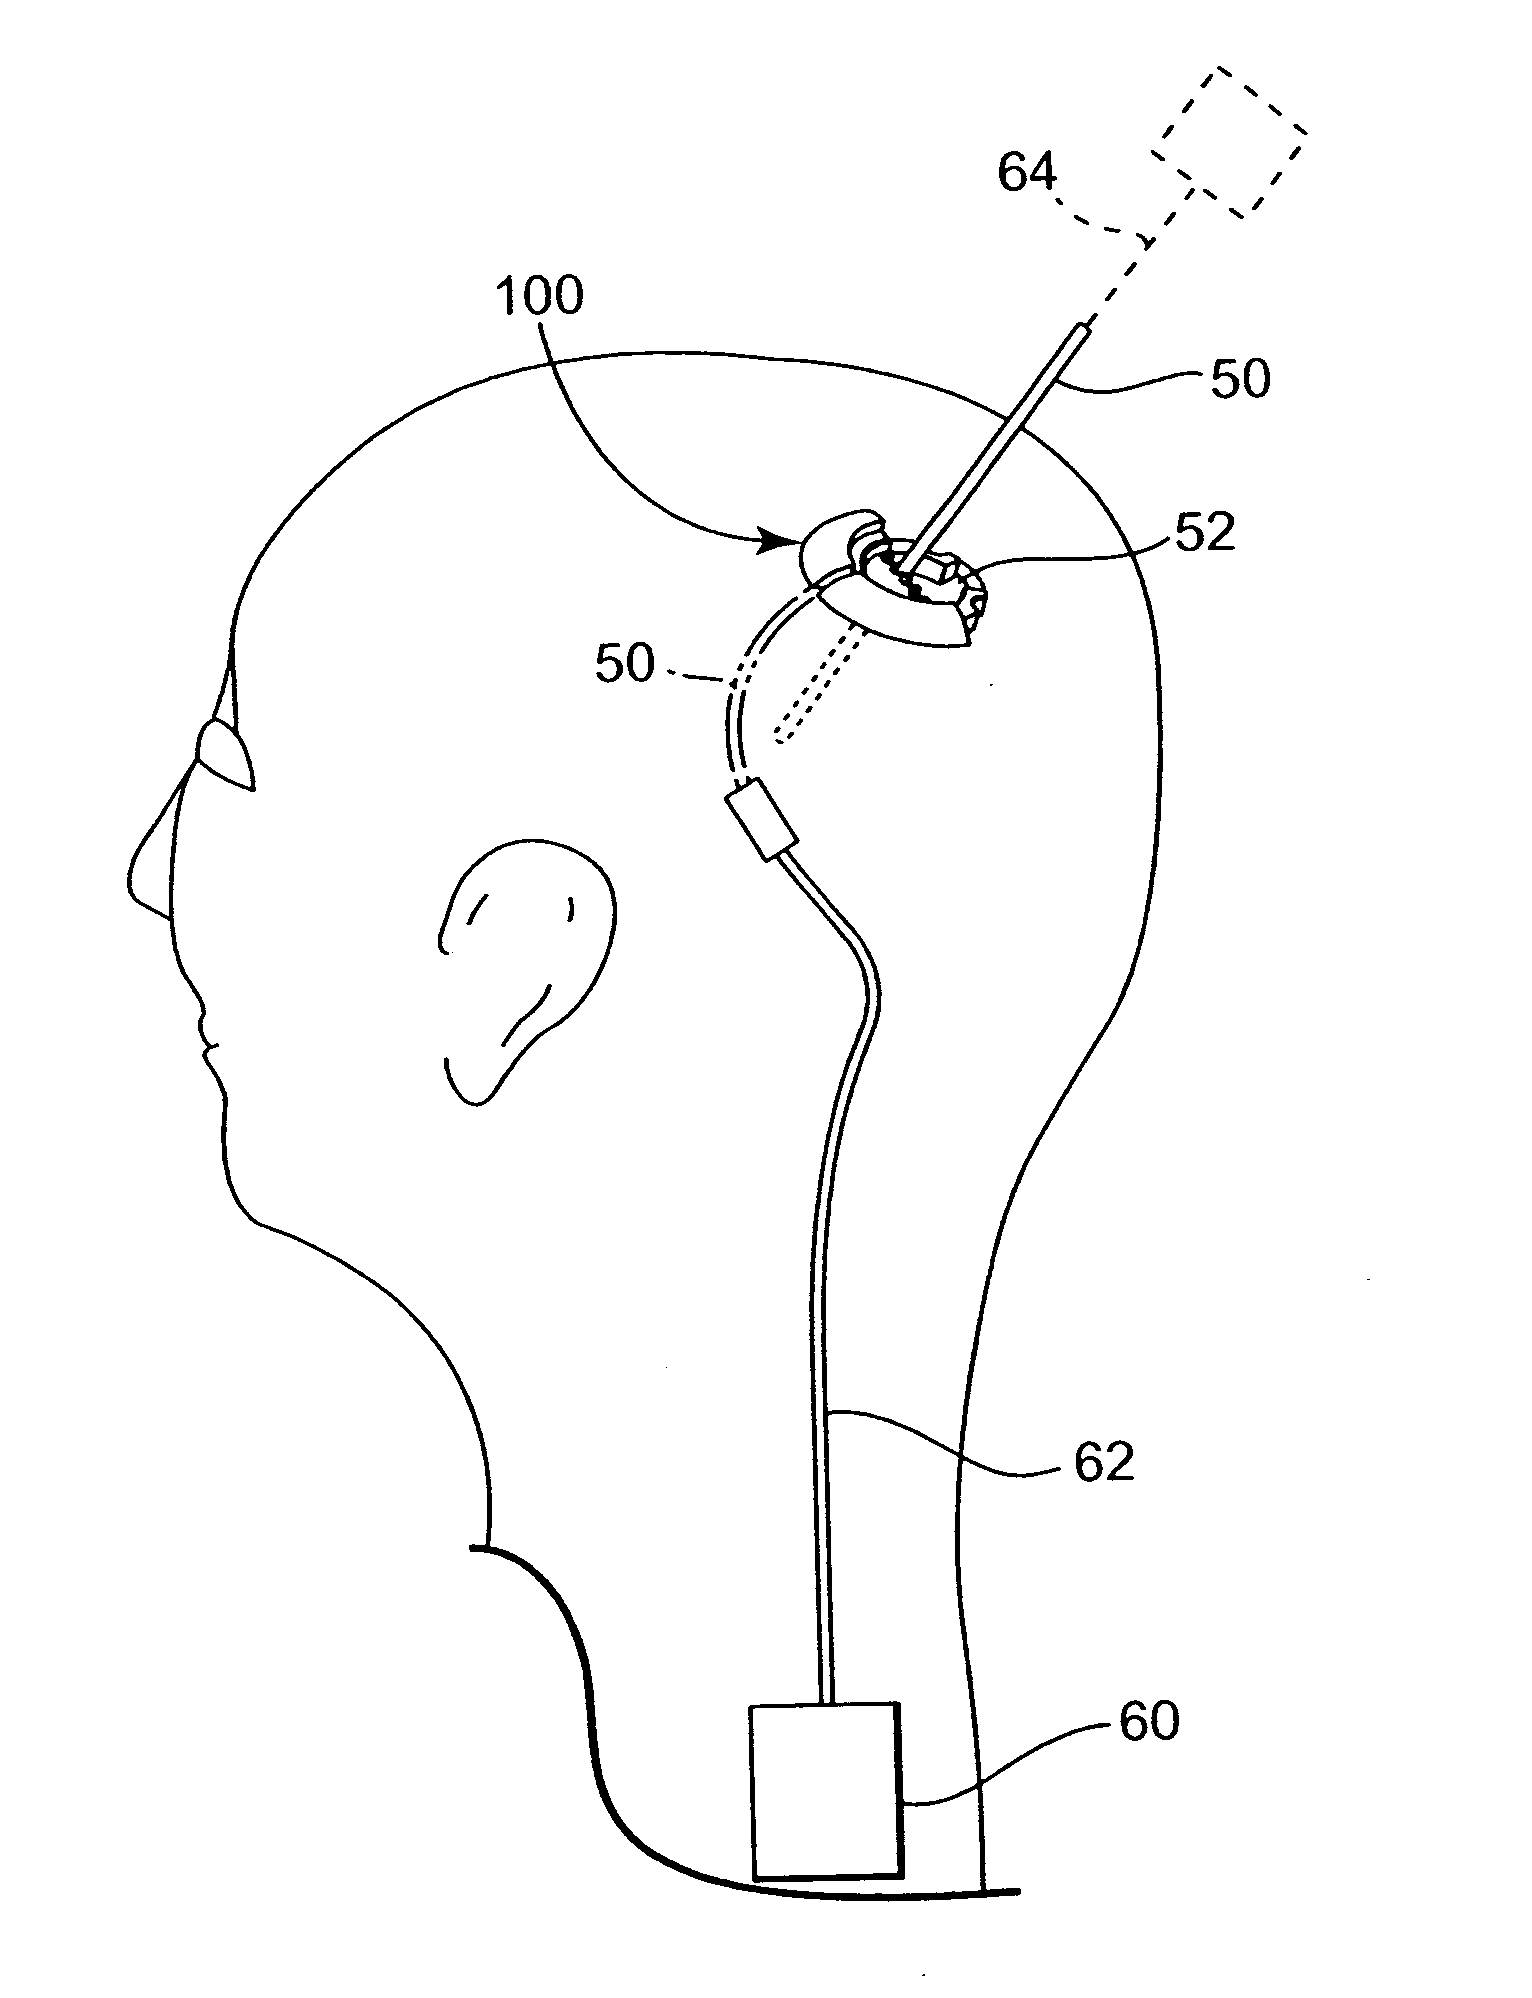 Methods and apparatus for securing a therapy delivery device within a burr hole